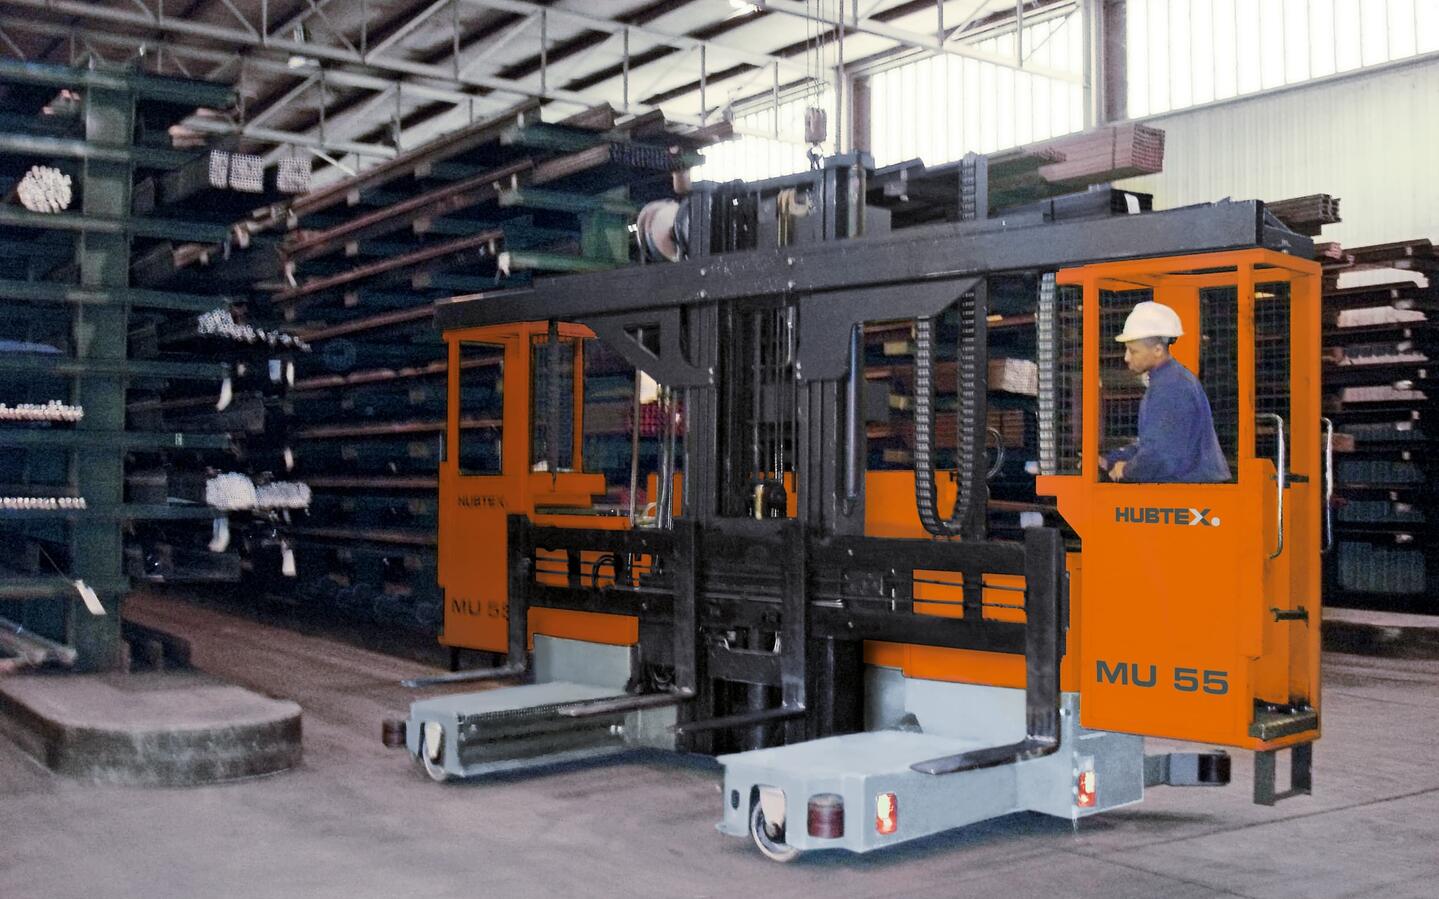 The two-cab version of the MU 55 being used in-house